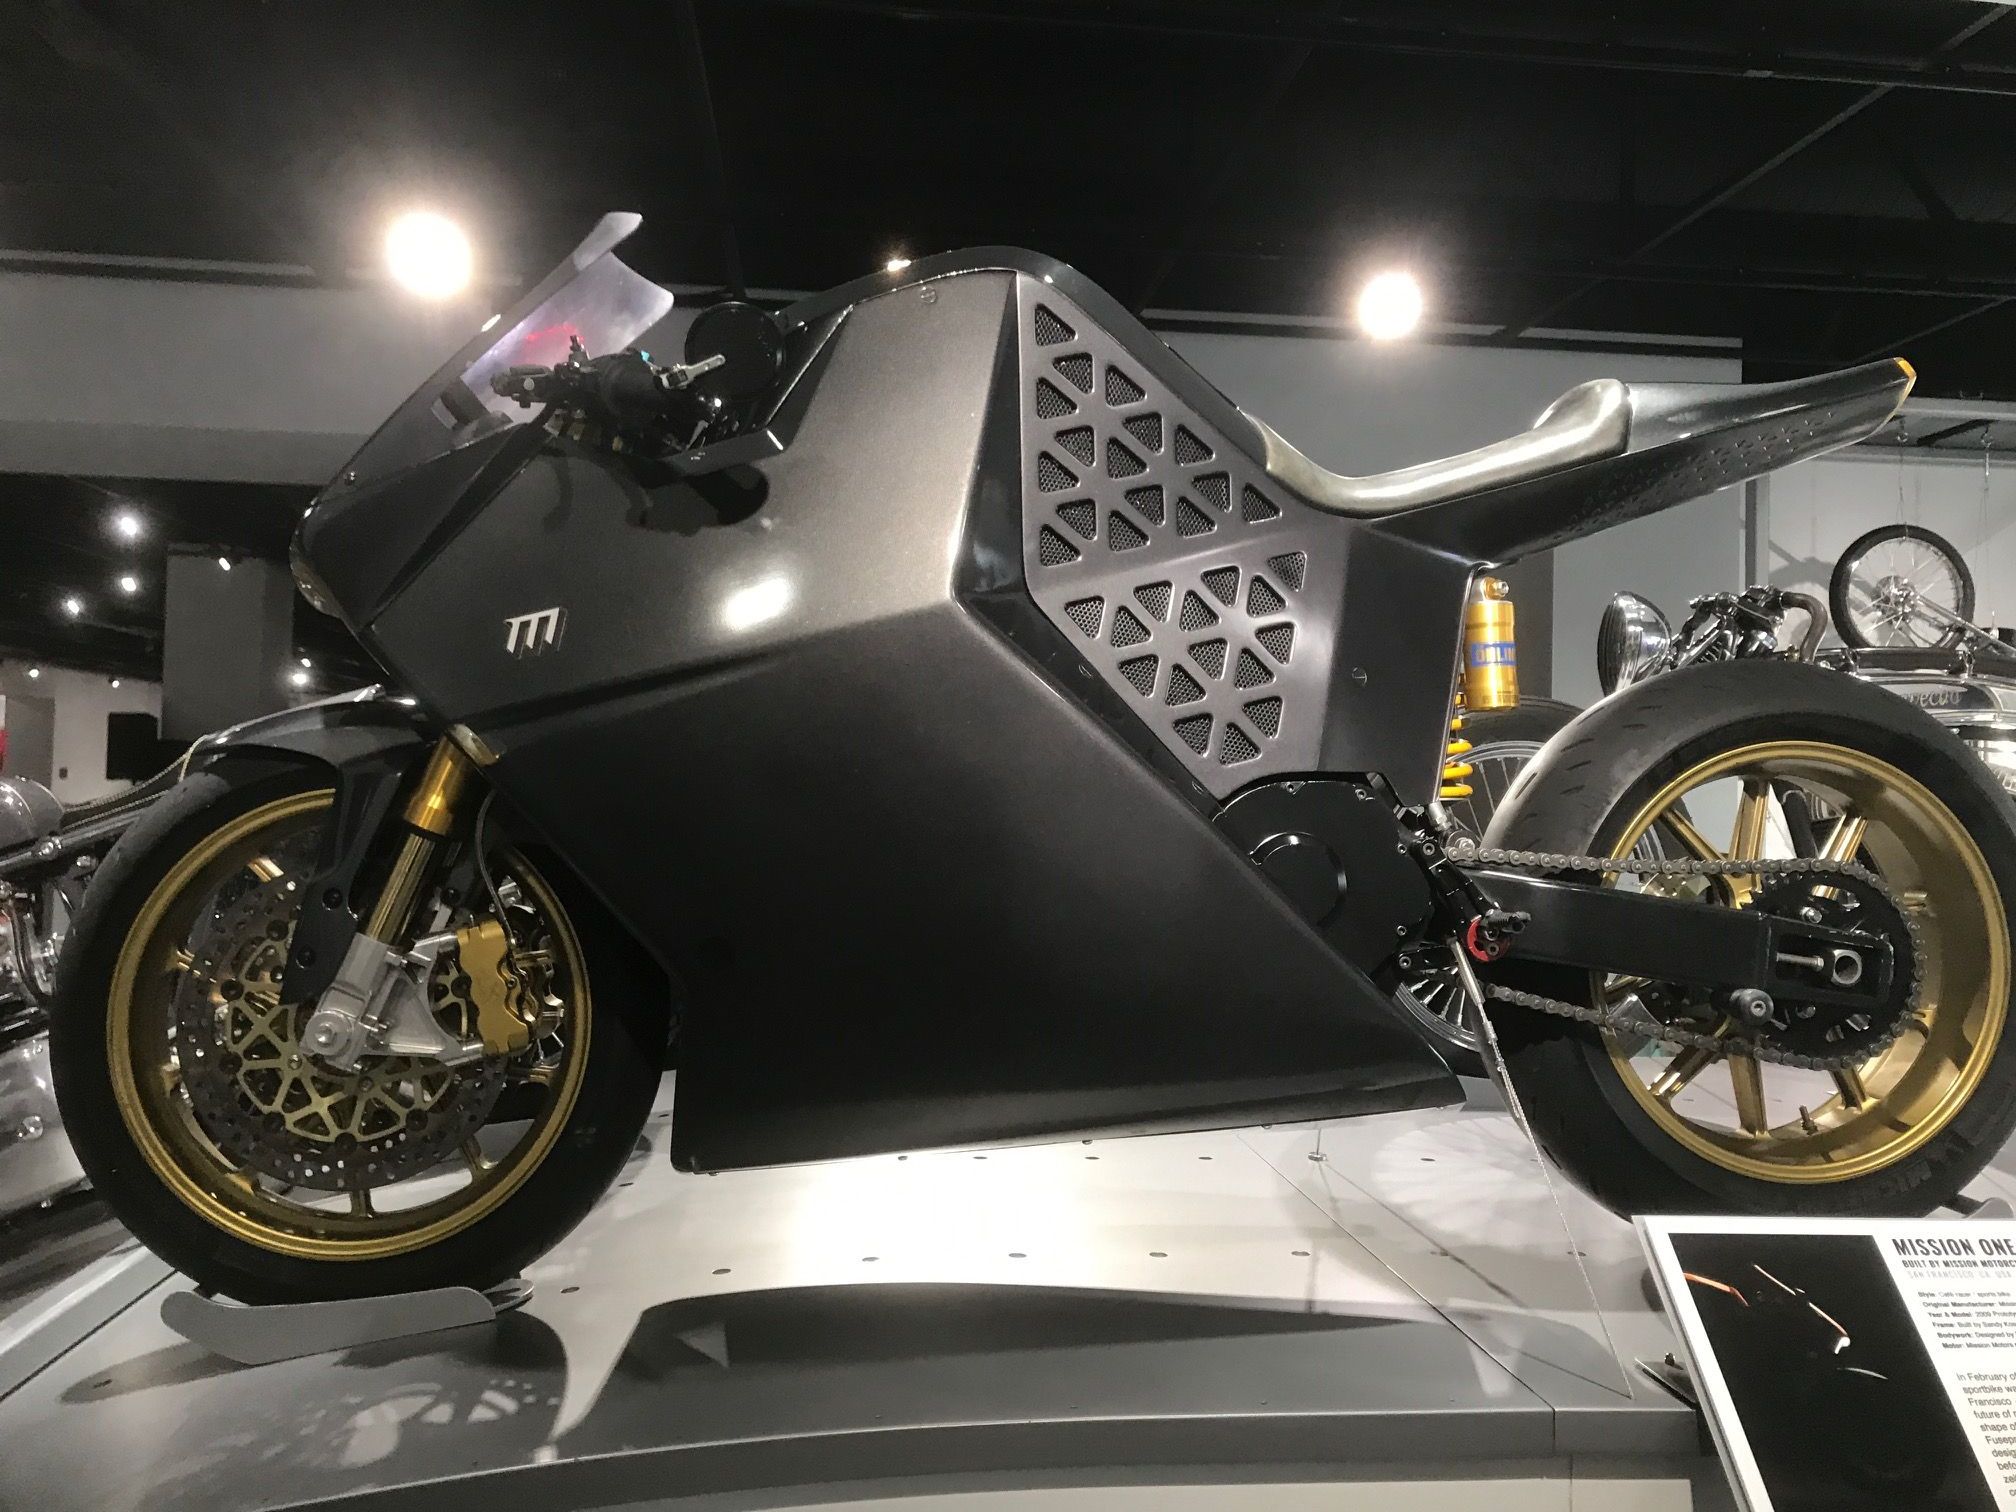 Mission Motor Company's "Mission One" is an early electric sportbike 